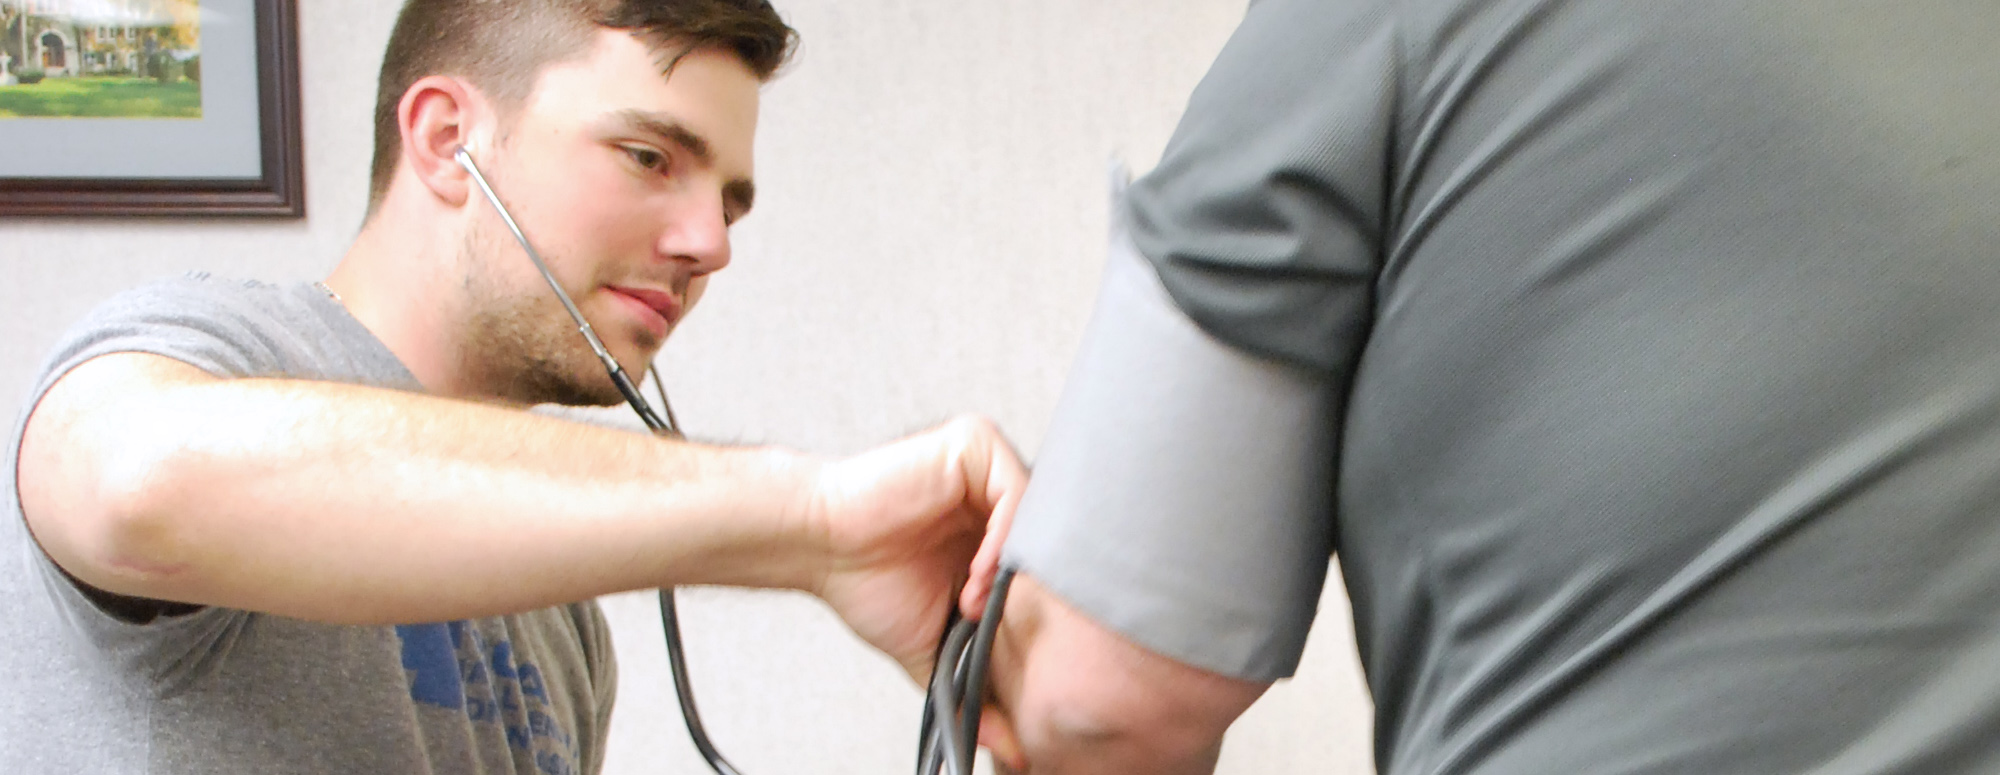 Male student with stethoscope working with an adult's arm